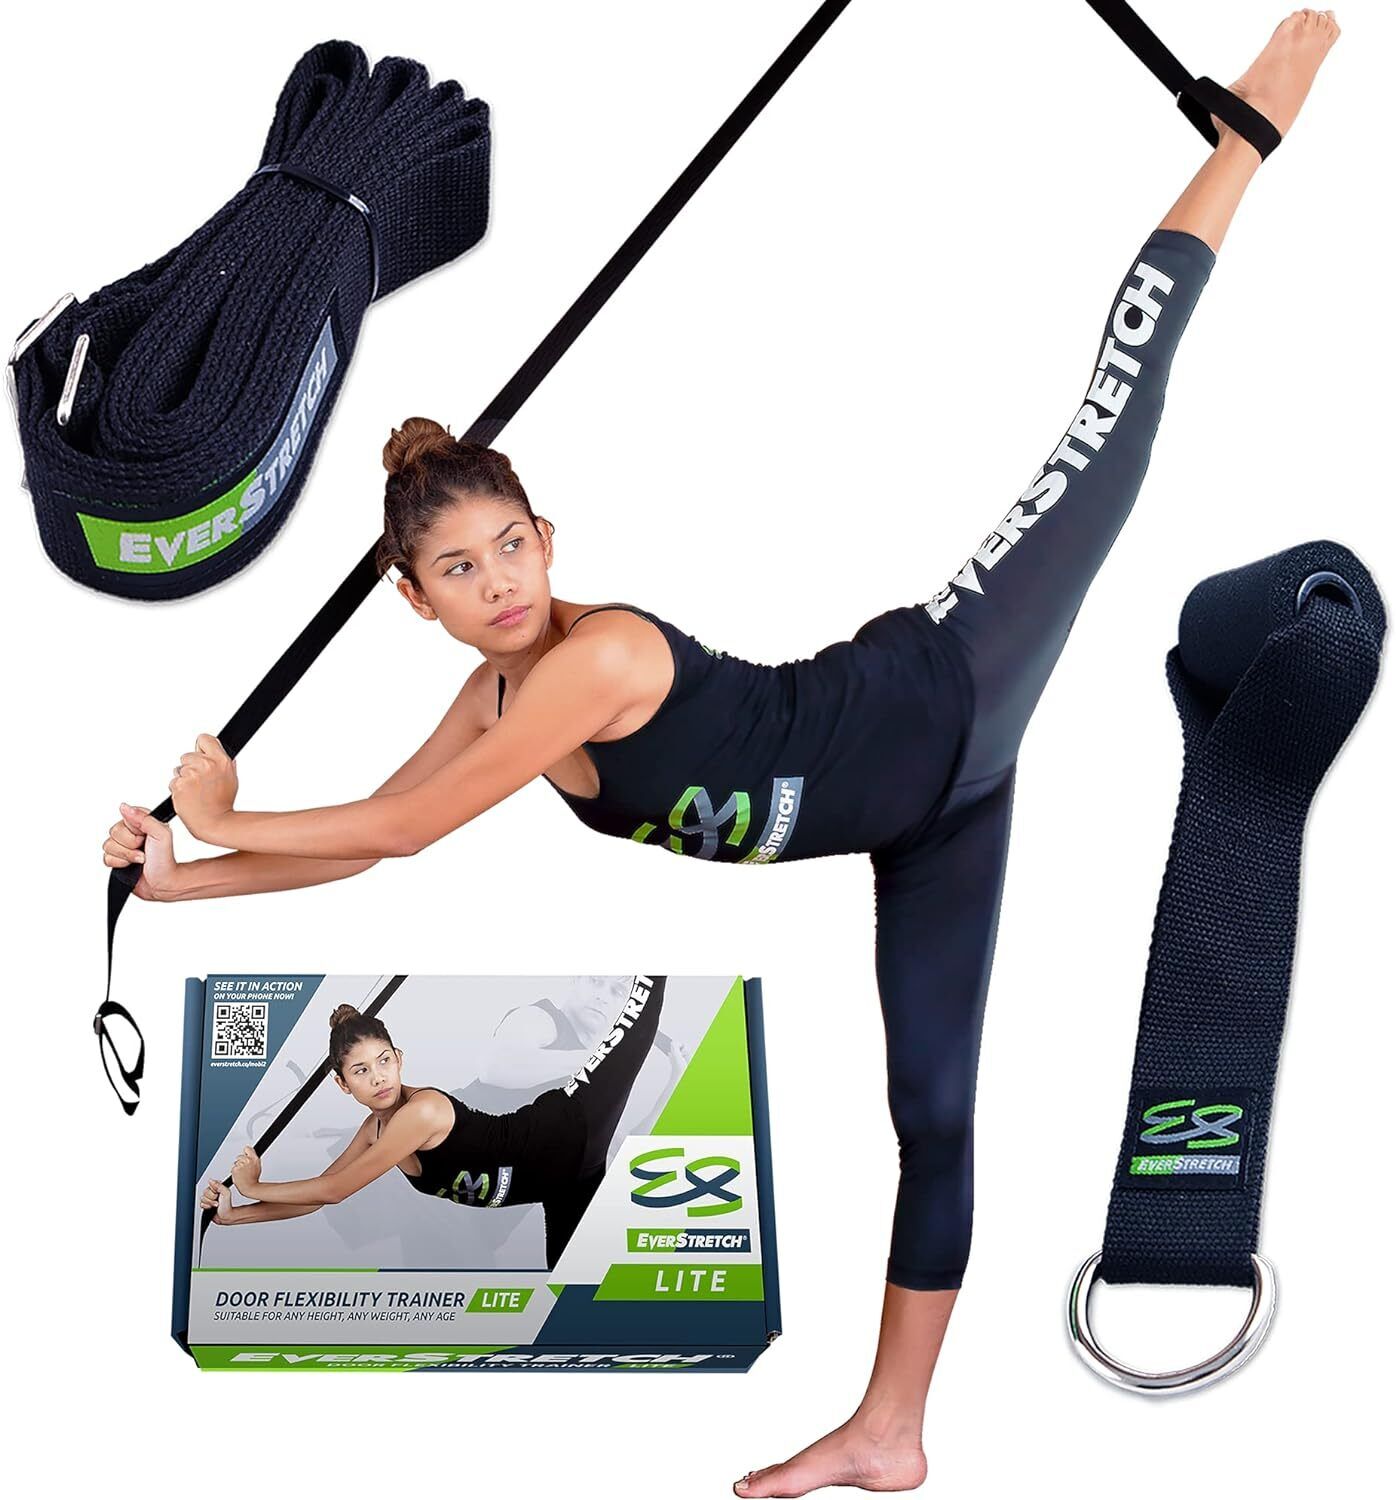 EverStretch Leg Stretcher LITE: Get Flexible with Over The Door Black  EverStretch Does not apply